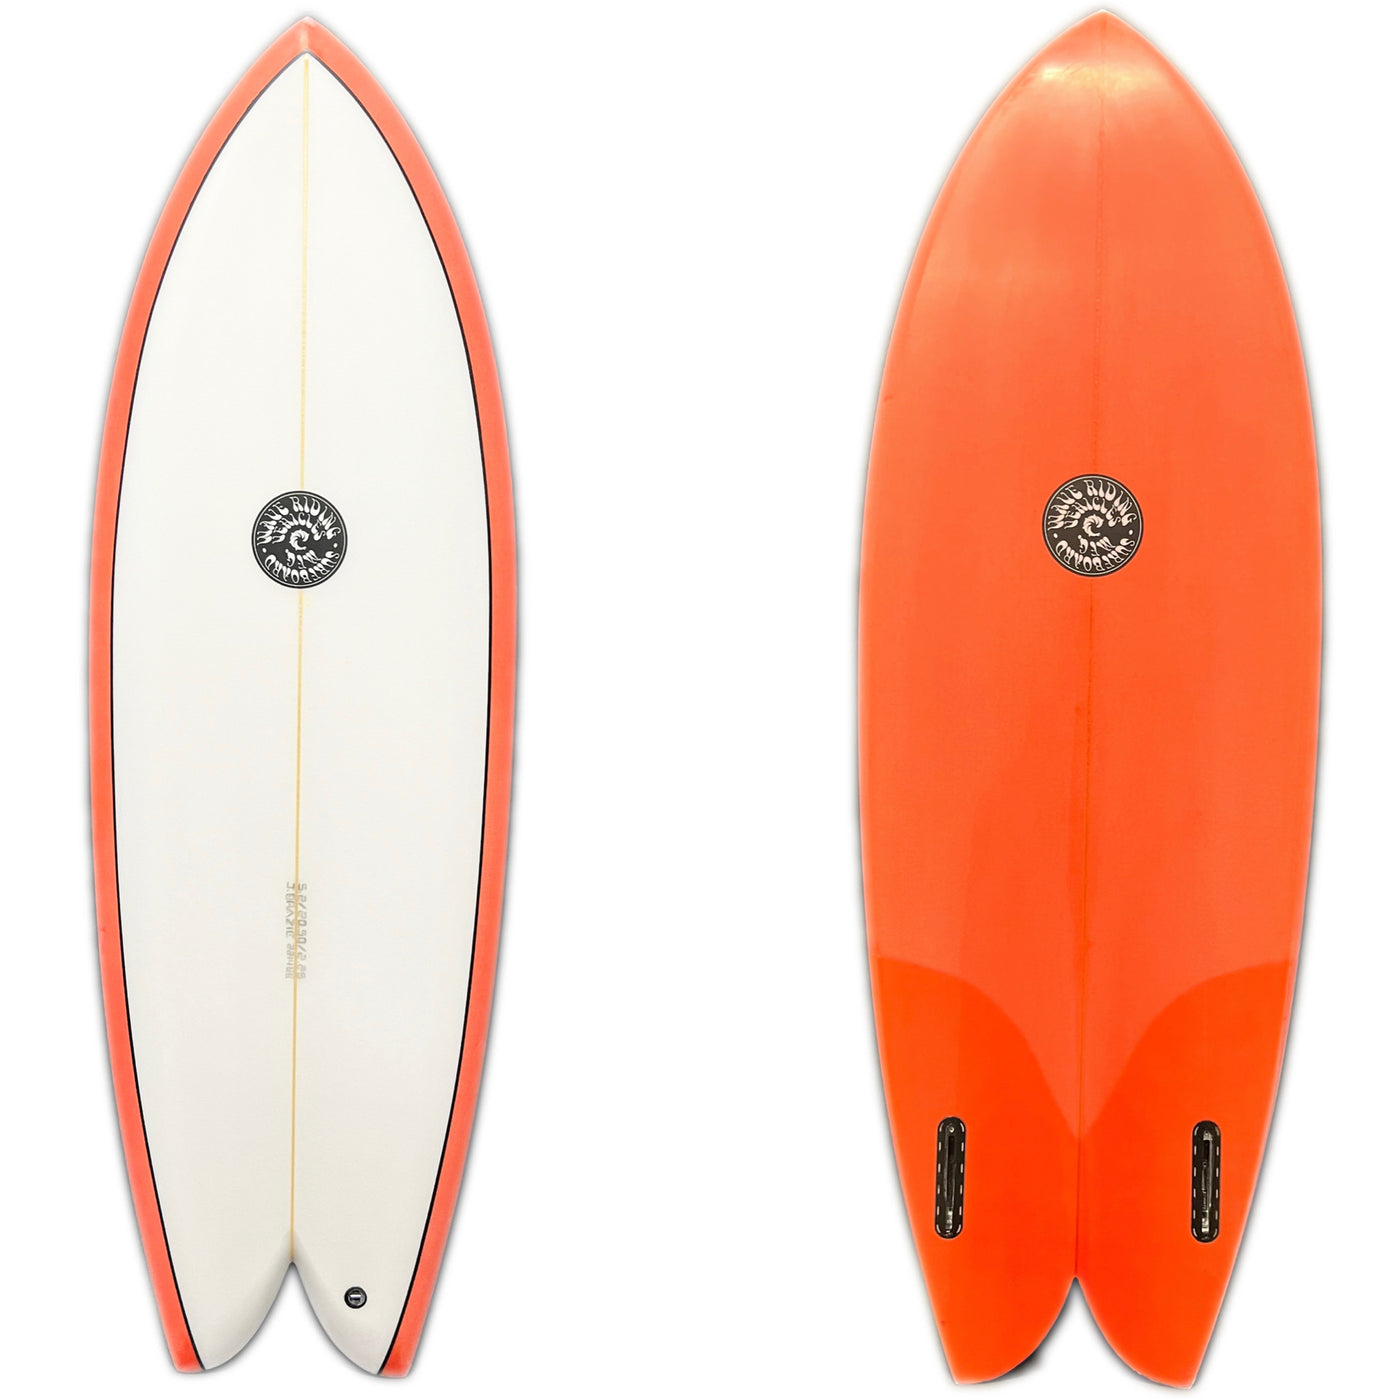 WRV 5'2" Brazie Twin Fin Red Tint Surfboard